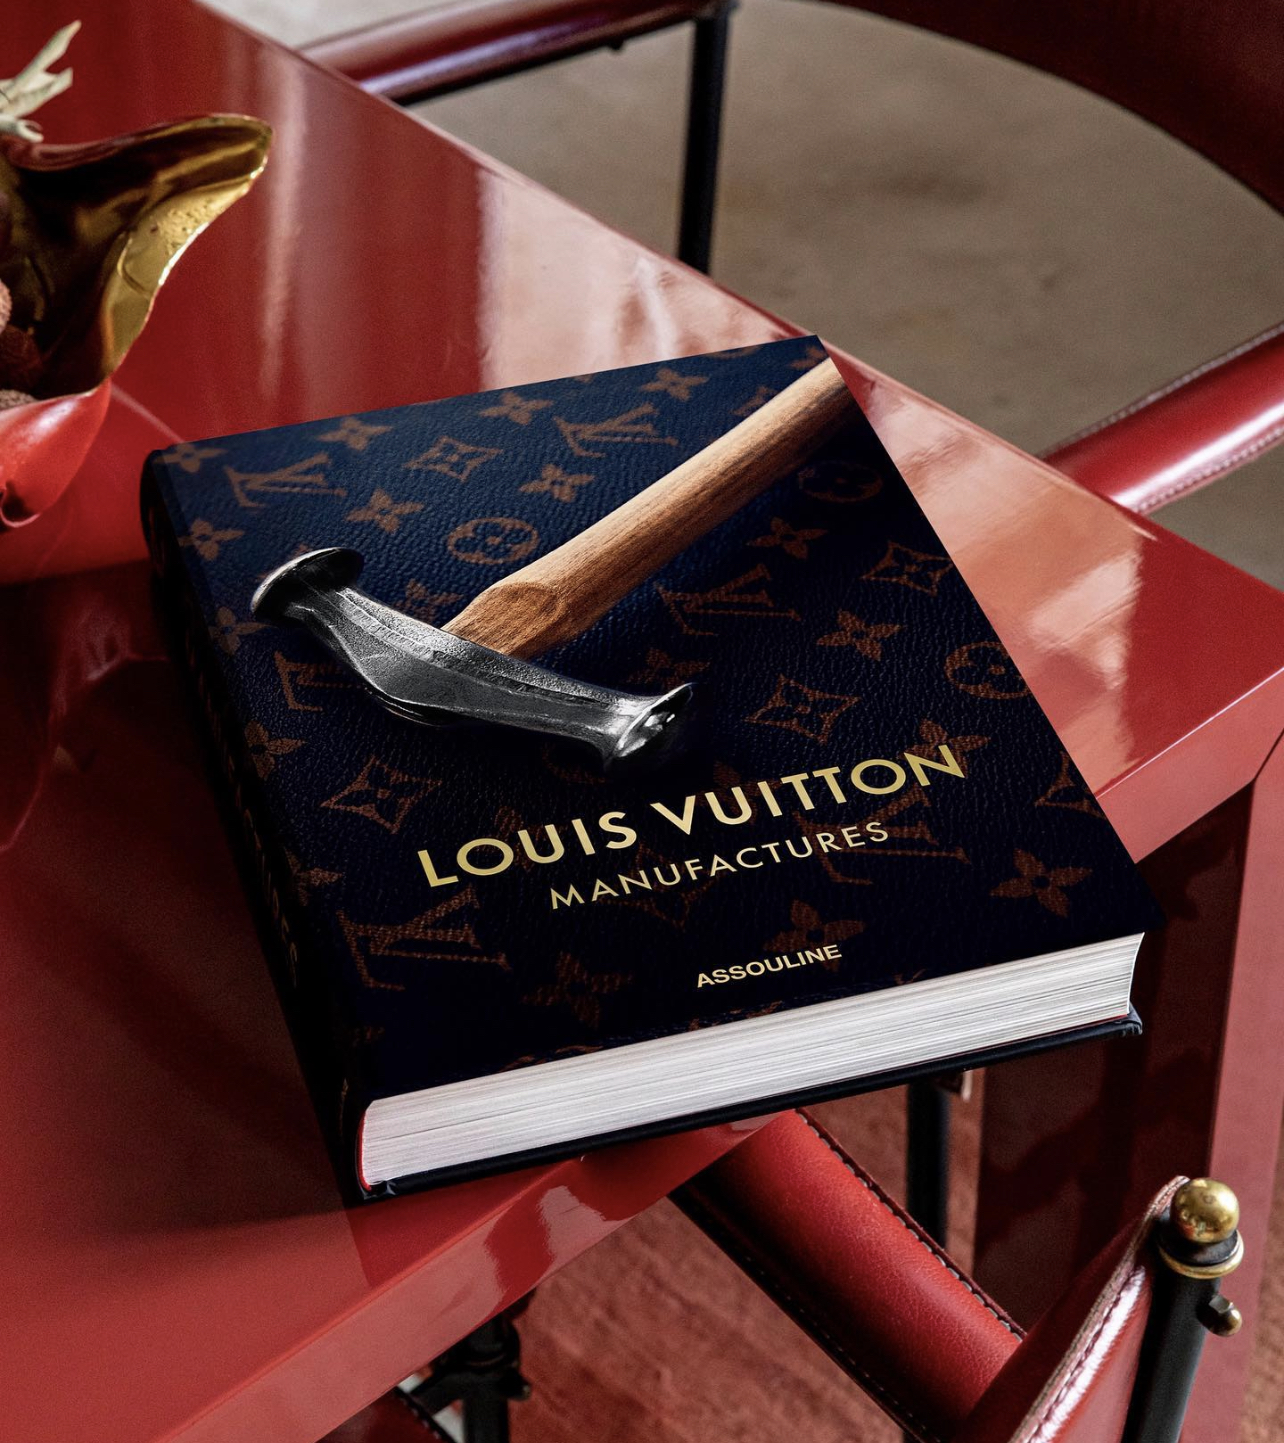 Louis Vuitton Manufactures - Assouline Coffee Table Book: Foulkes